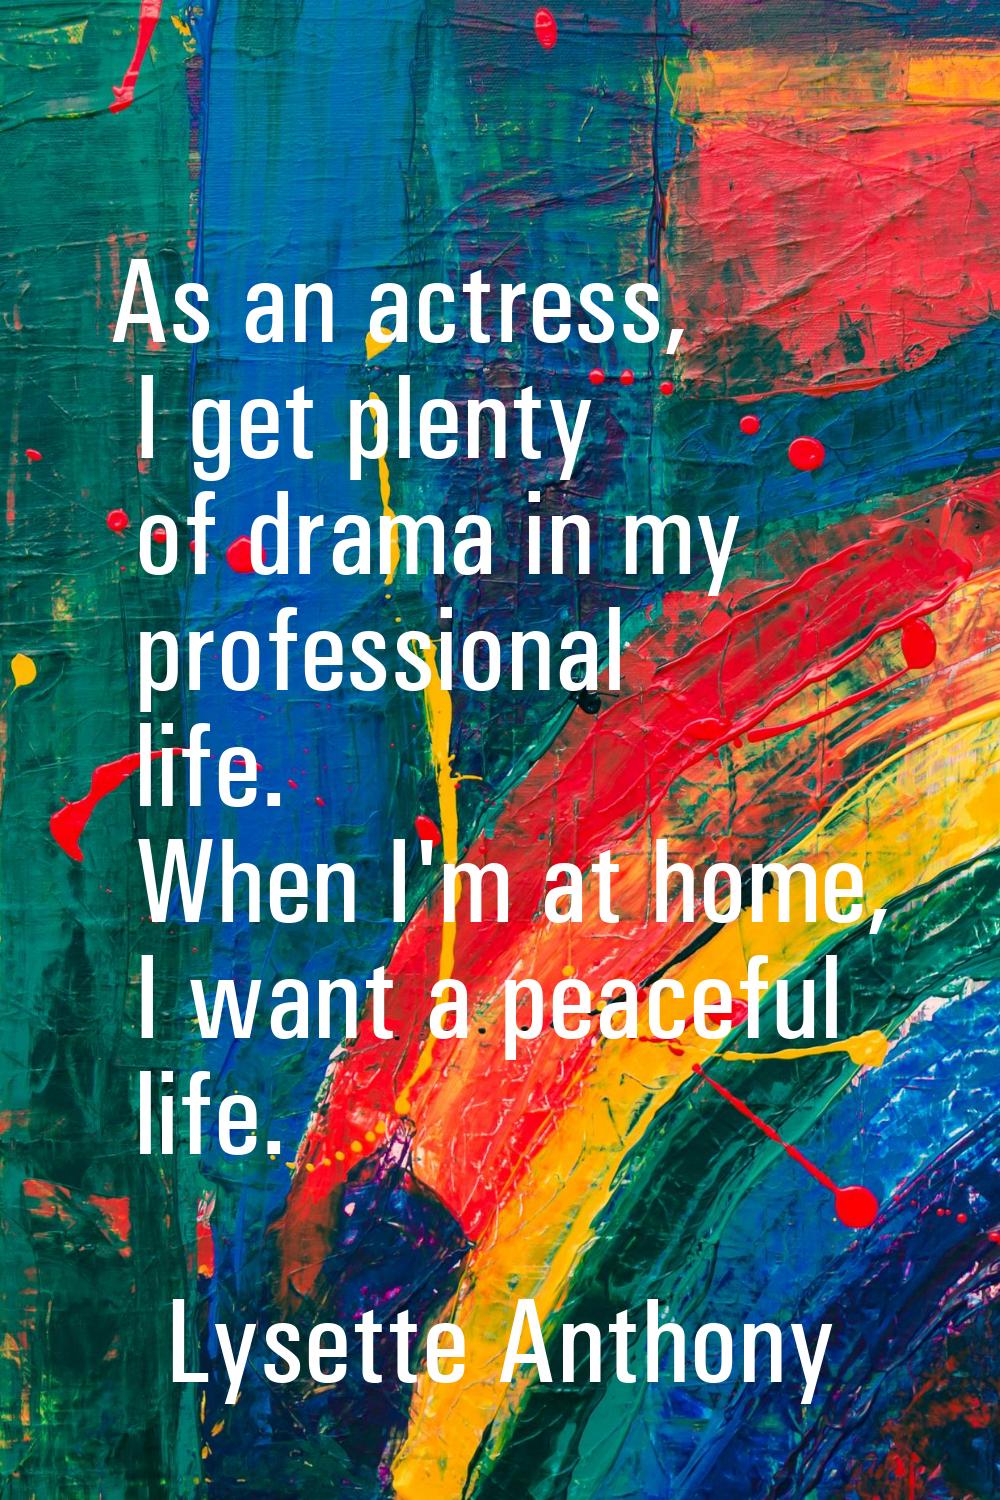 As an actress, I get plenty of drama in my professional life. When I'm at home, I want a peaceful l